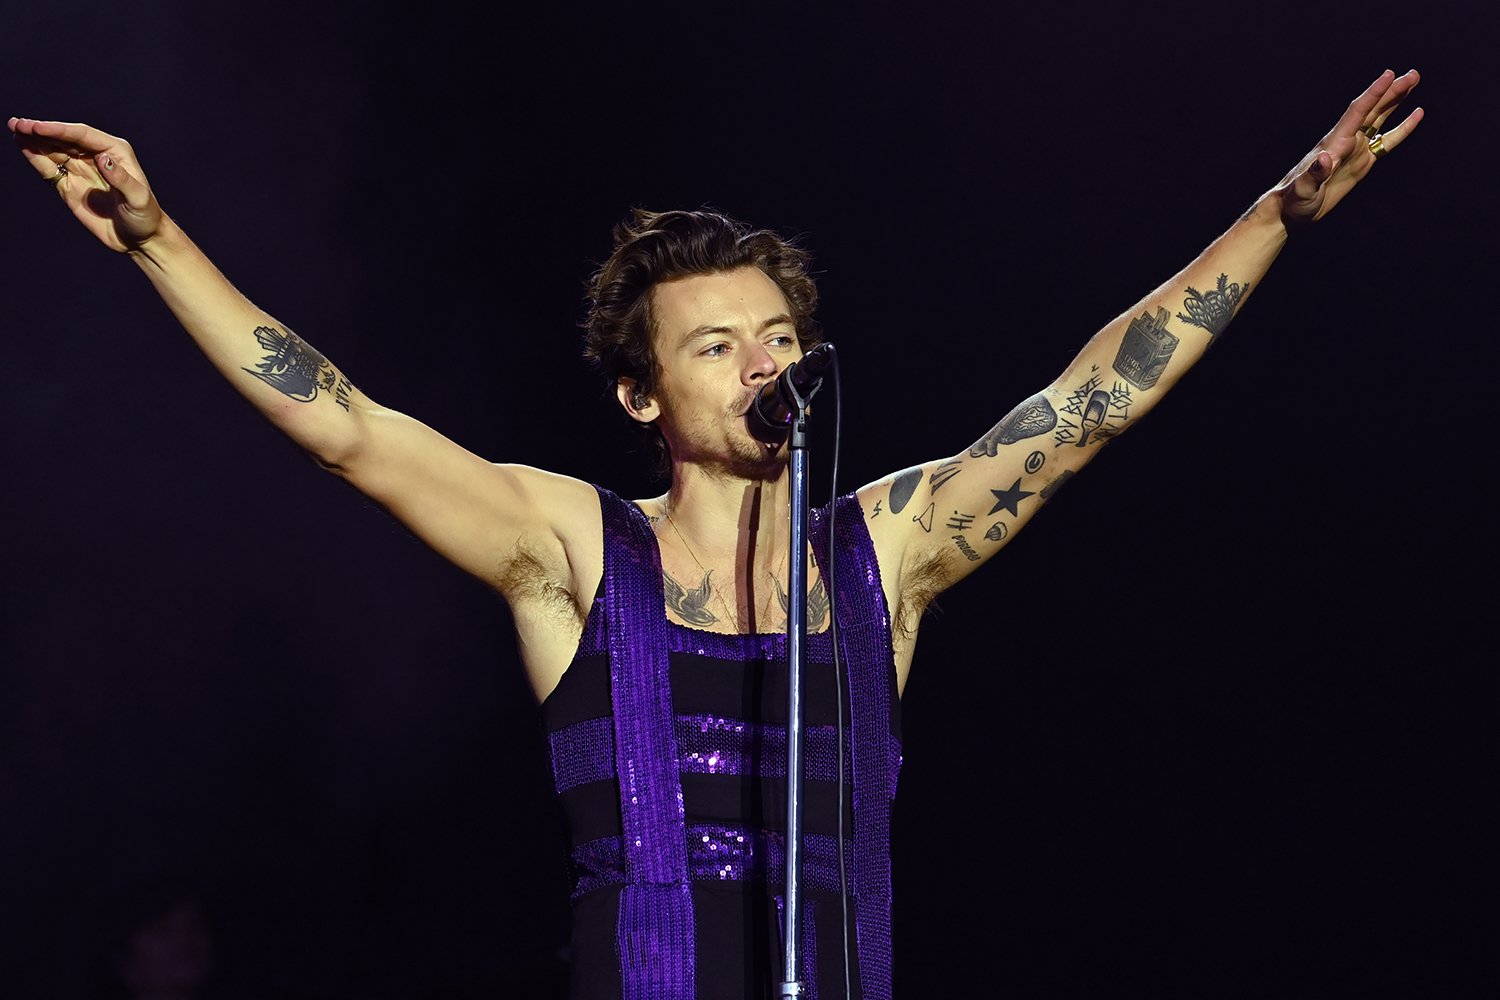 Harry Styles performs on stage during Radio 1's Big Weekend 2022 at War Memorial Park as rumors swirl that he's bald